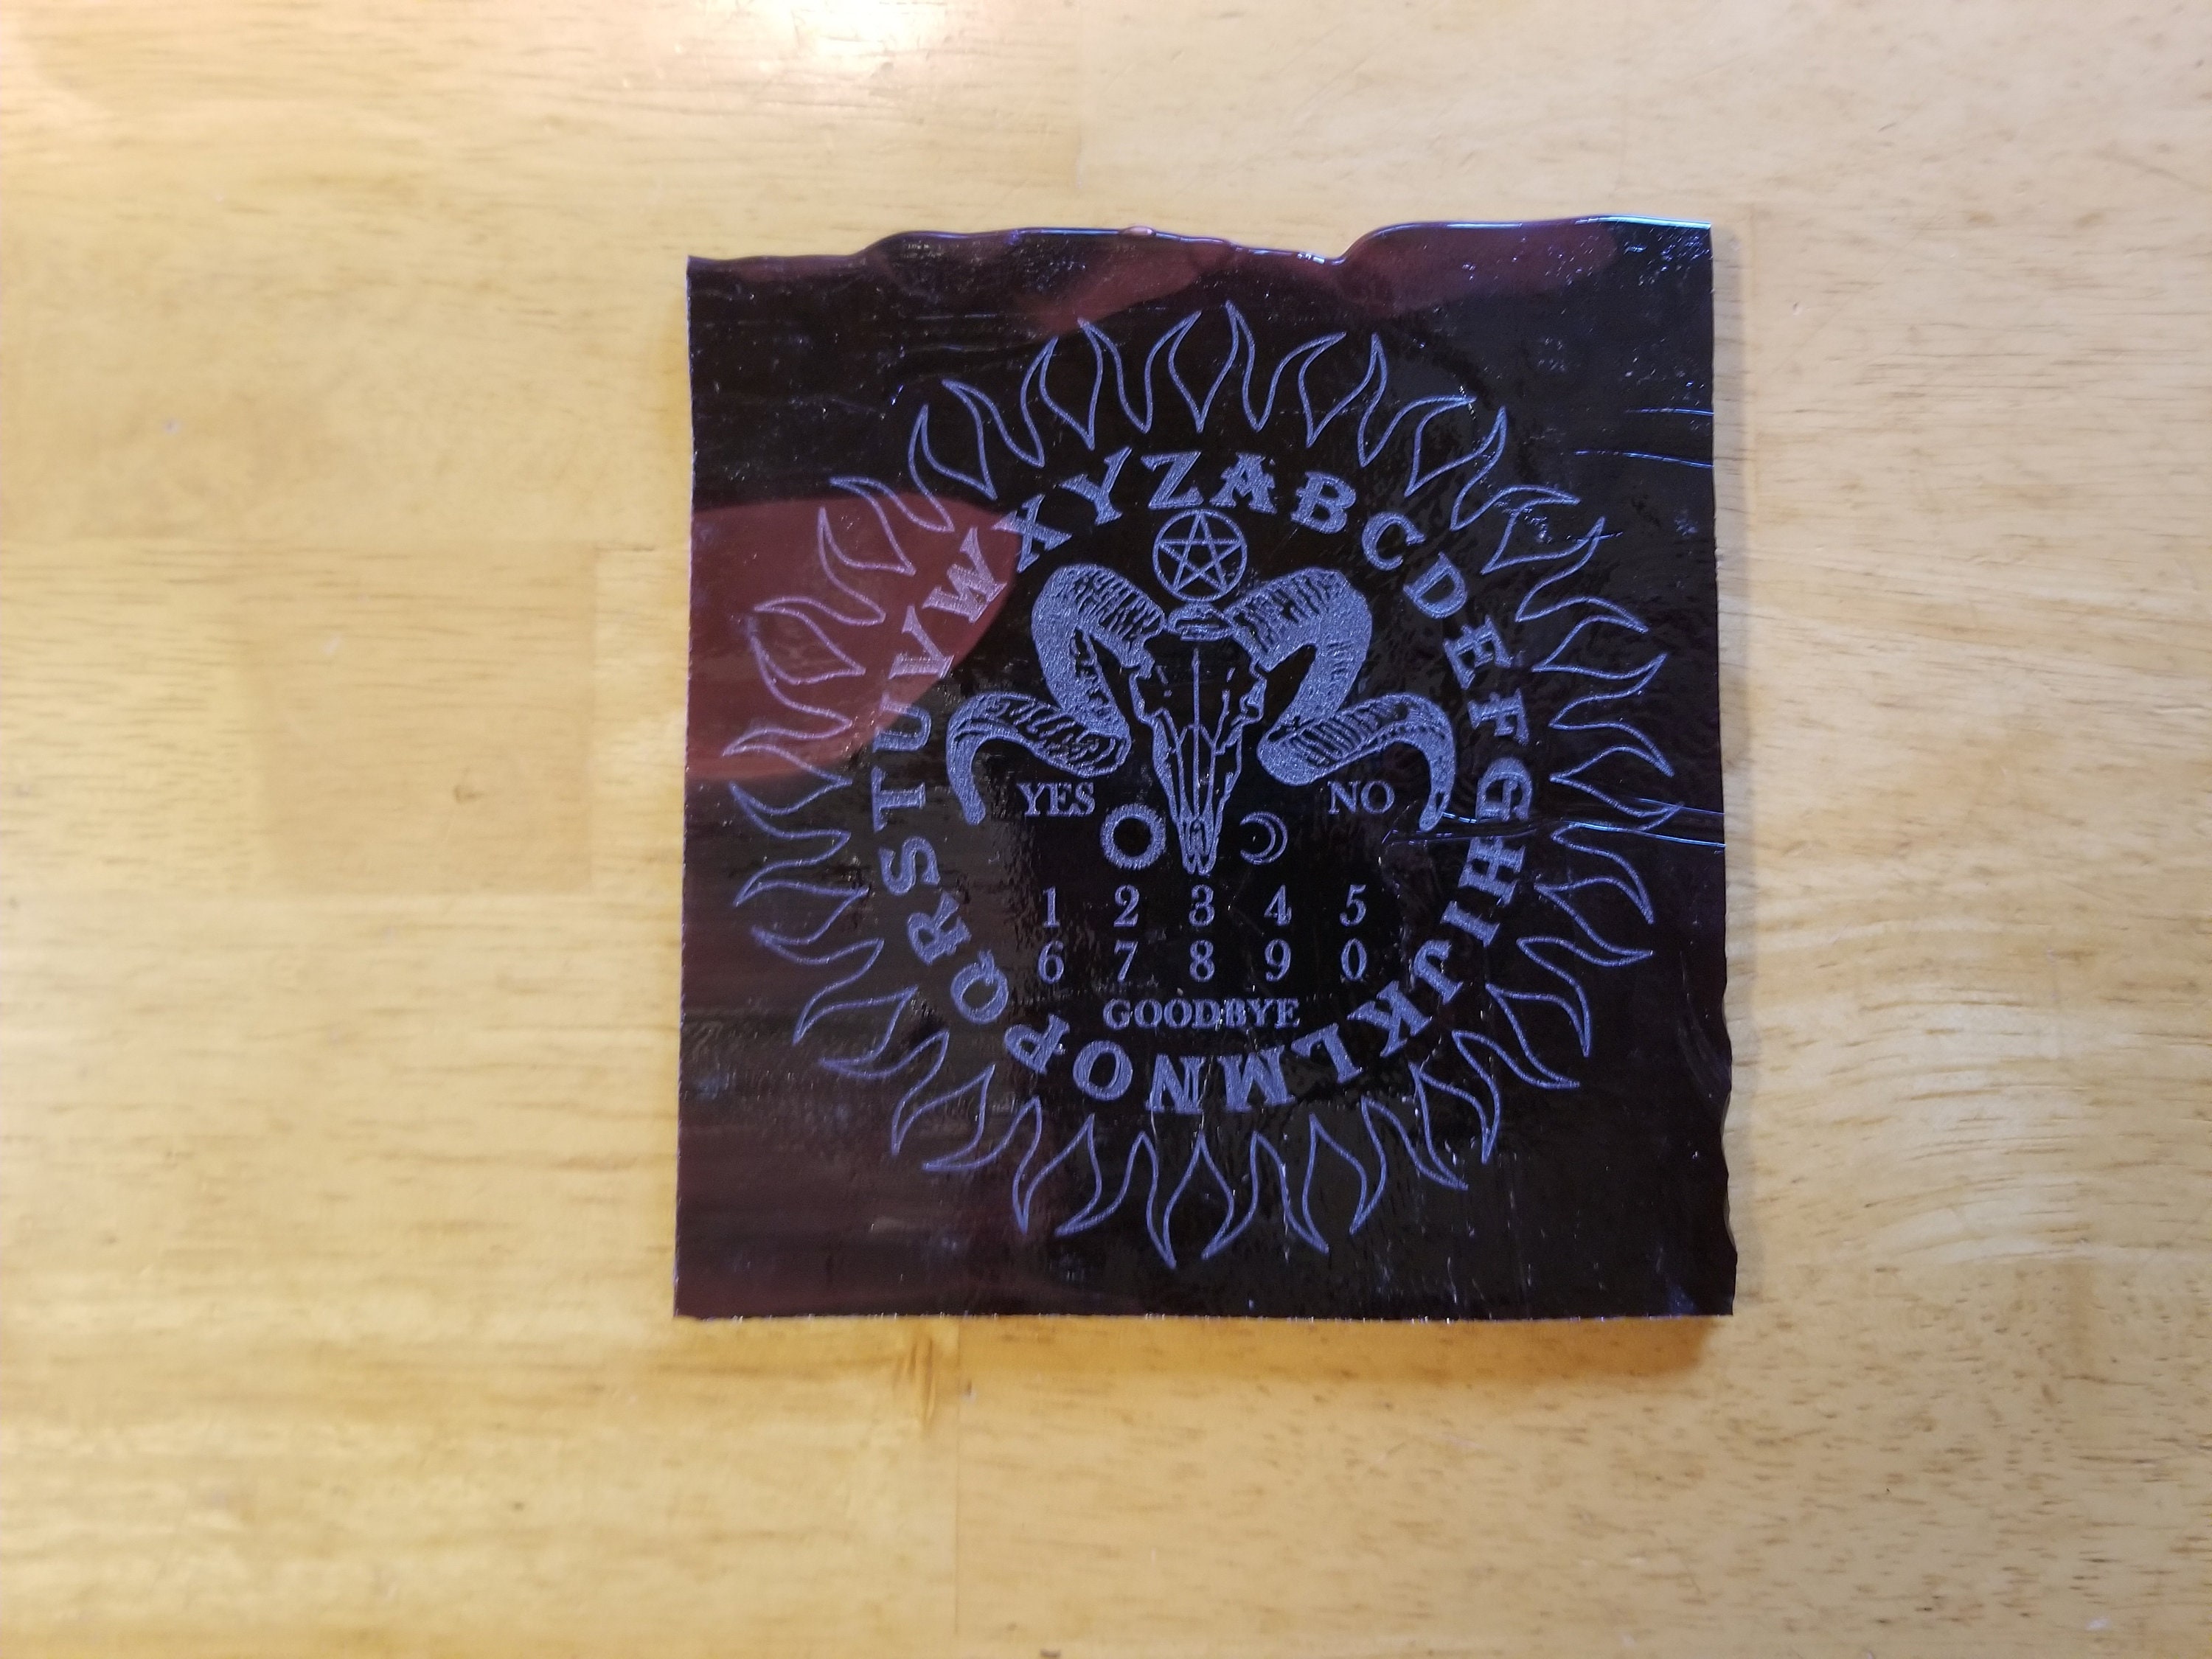 Ram's Skull Miniature Ouija Spirit Board Design Etched On Youghiogheny Stained Glass